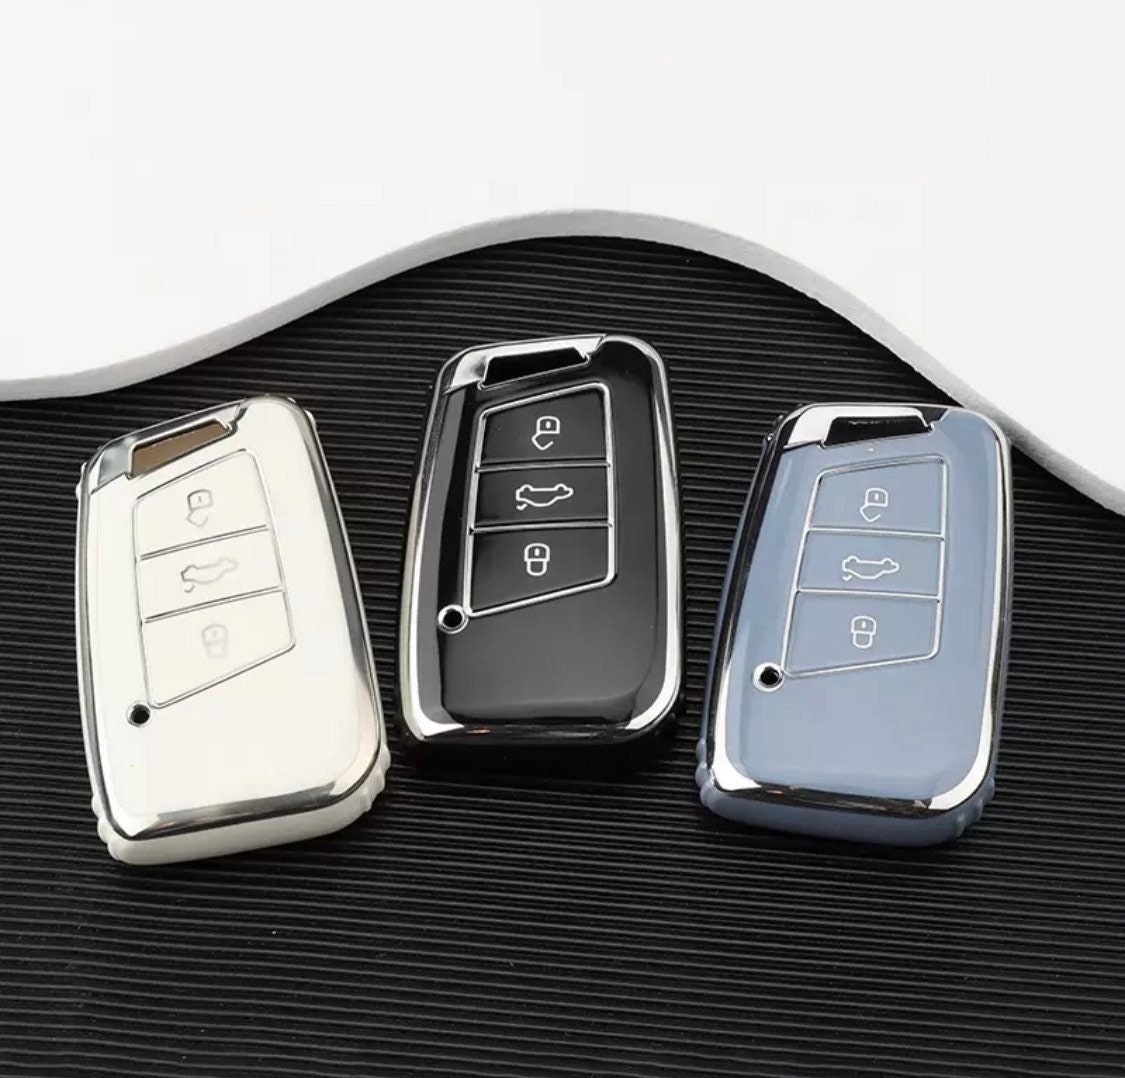 3pcs/set Tpu Soft Shell Car Key Case Cover + Black Braided Car Key Chain  Strap With Screwdriver Compatible With Nissan 4-button Smart Car Keys